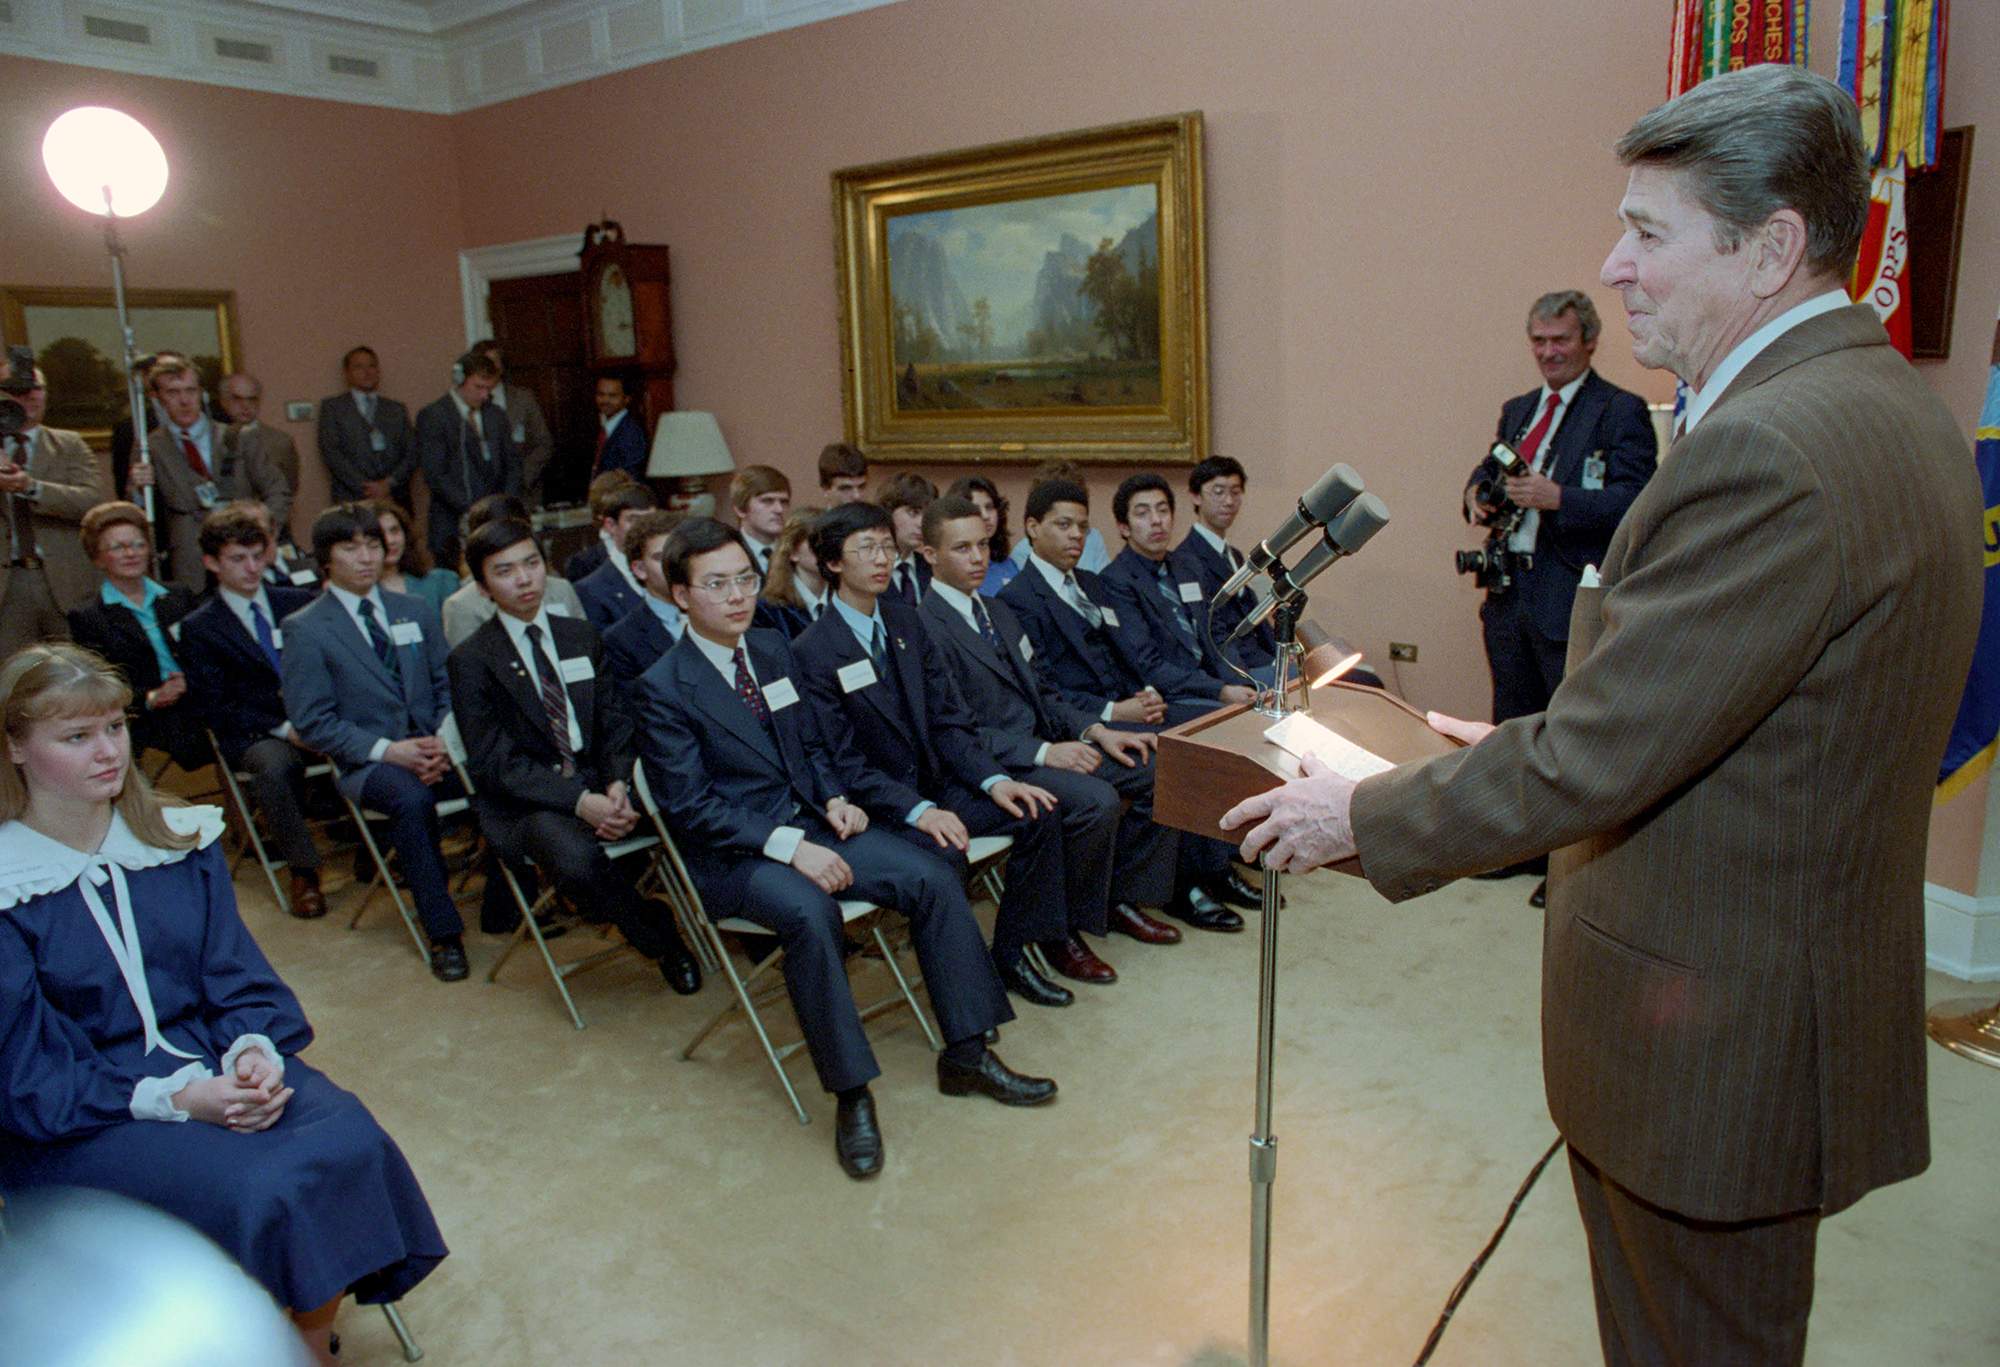 STS finalists visit President Reagan at the White House